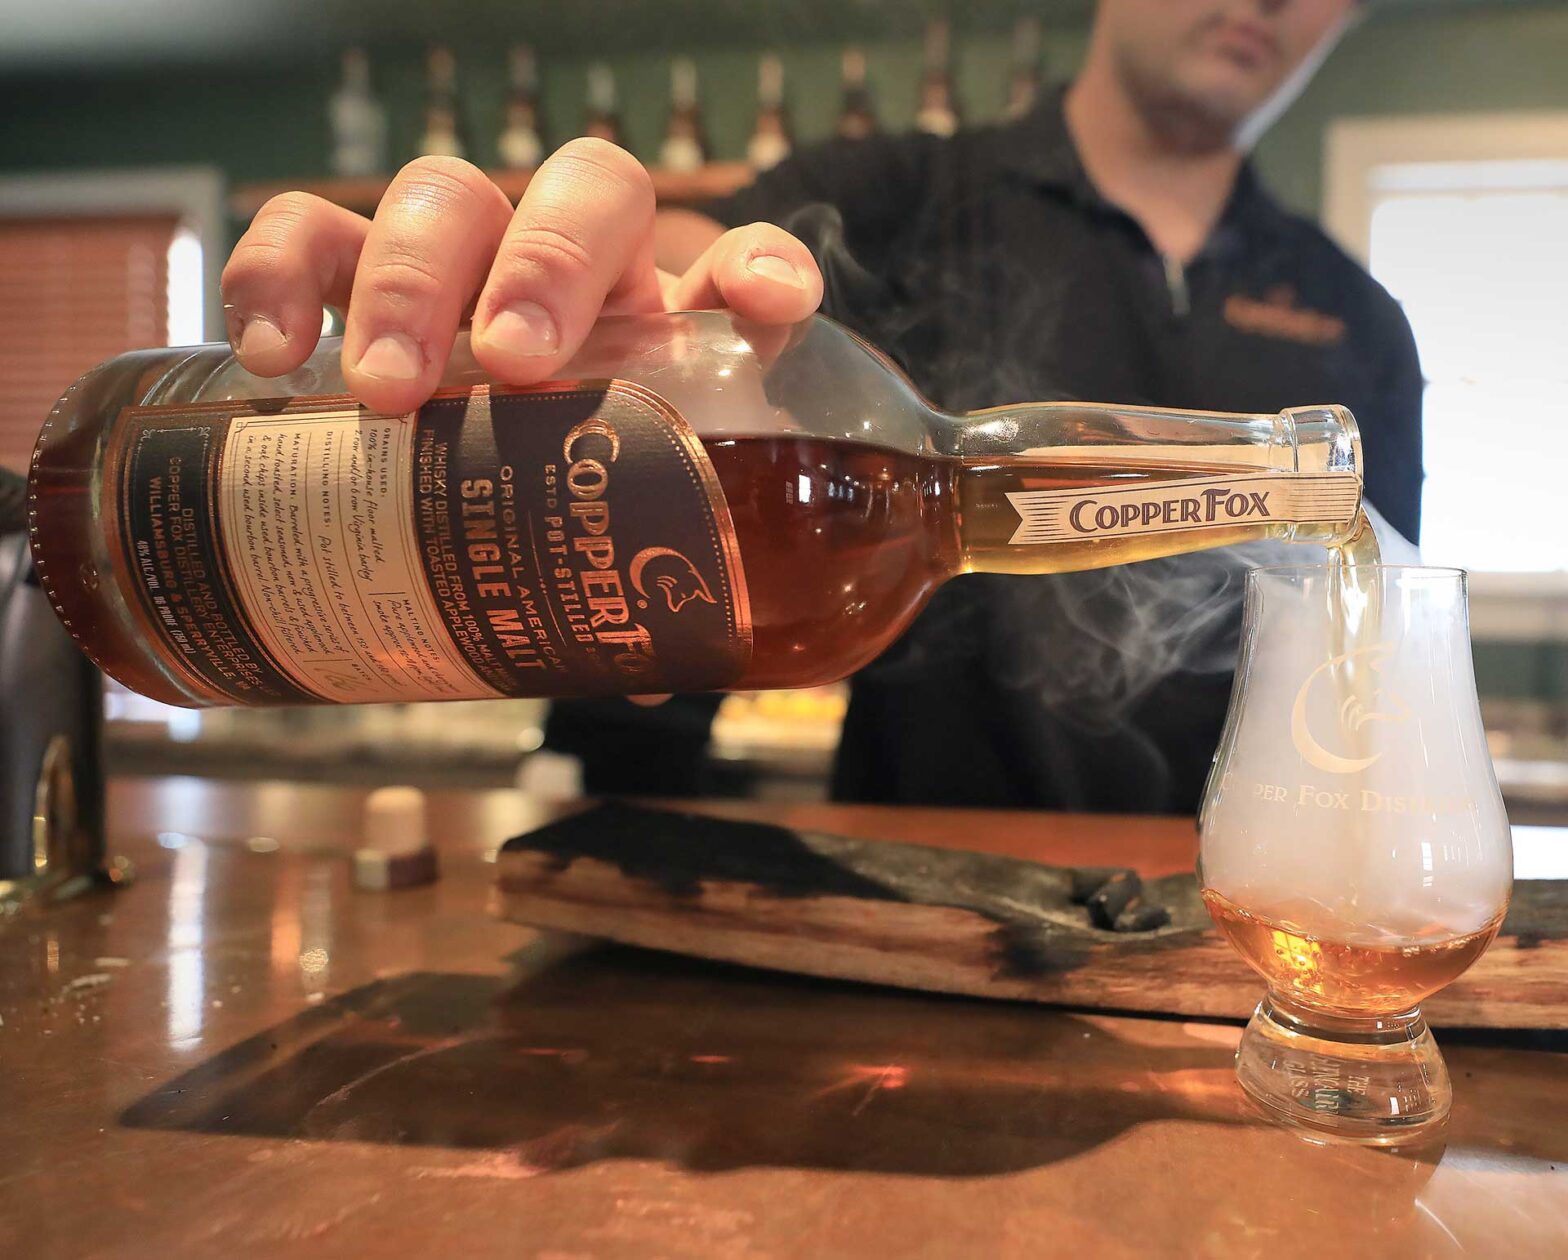 Making a Smokey Wasmund at the Copper Fox Distillery in Williamsburg in the Edge District September 22, 2020.